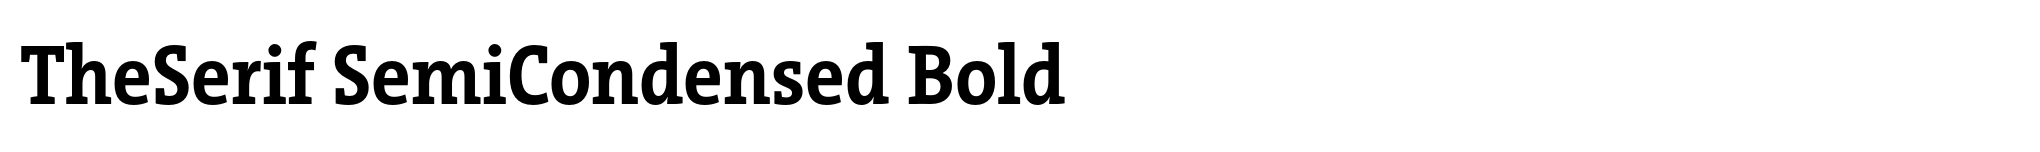 TheSerif SemiCondensed Bold image